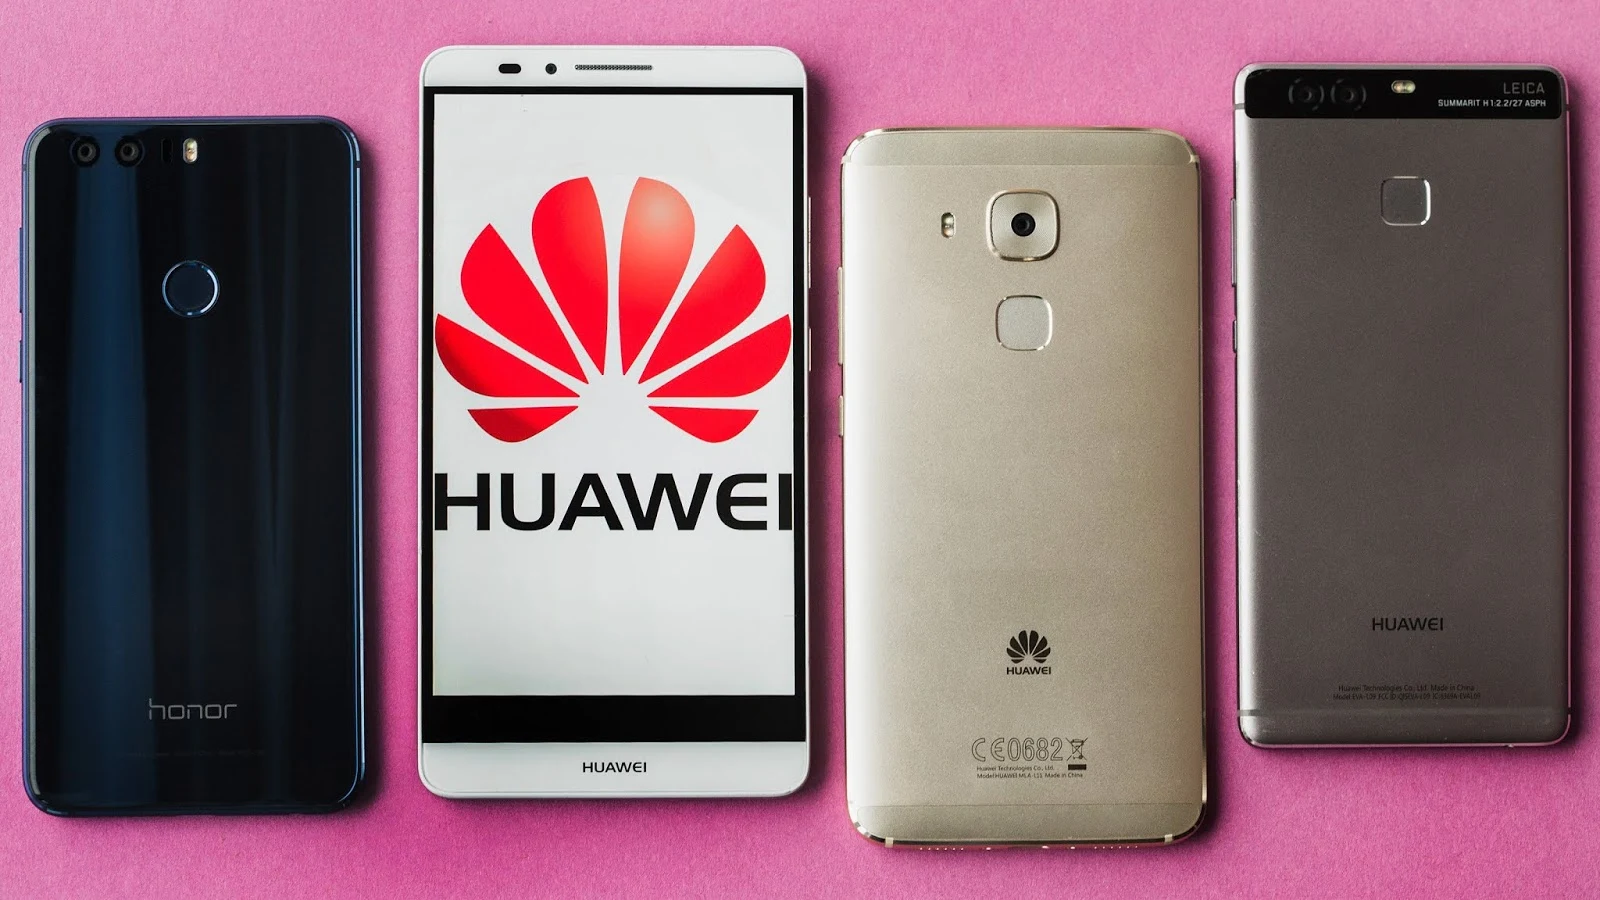 Huawei caught cheating performance test for new smartphones